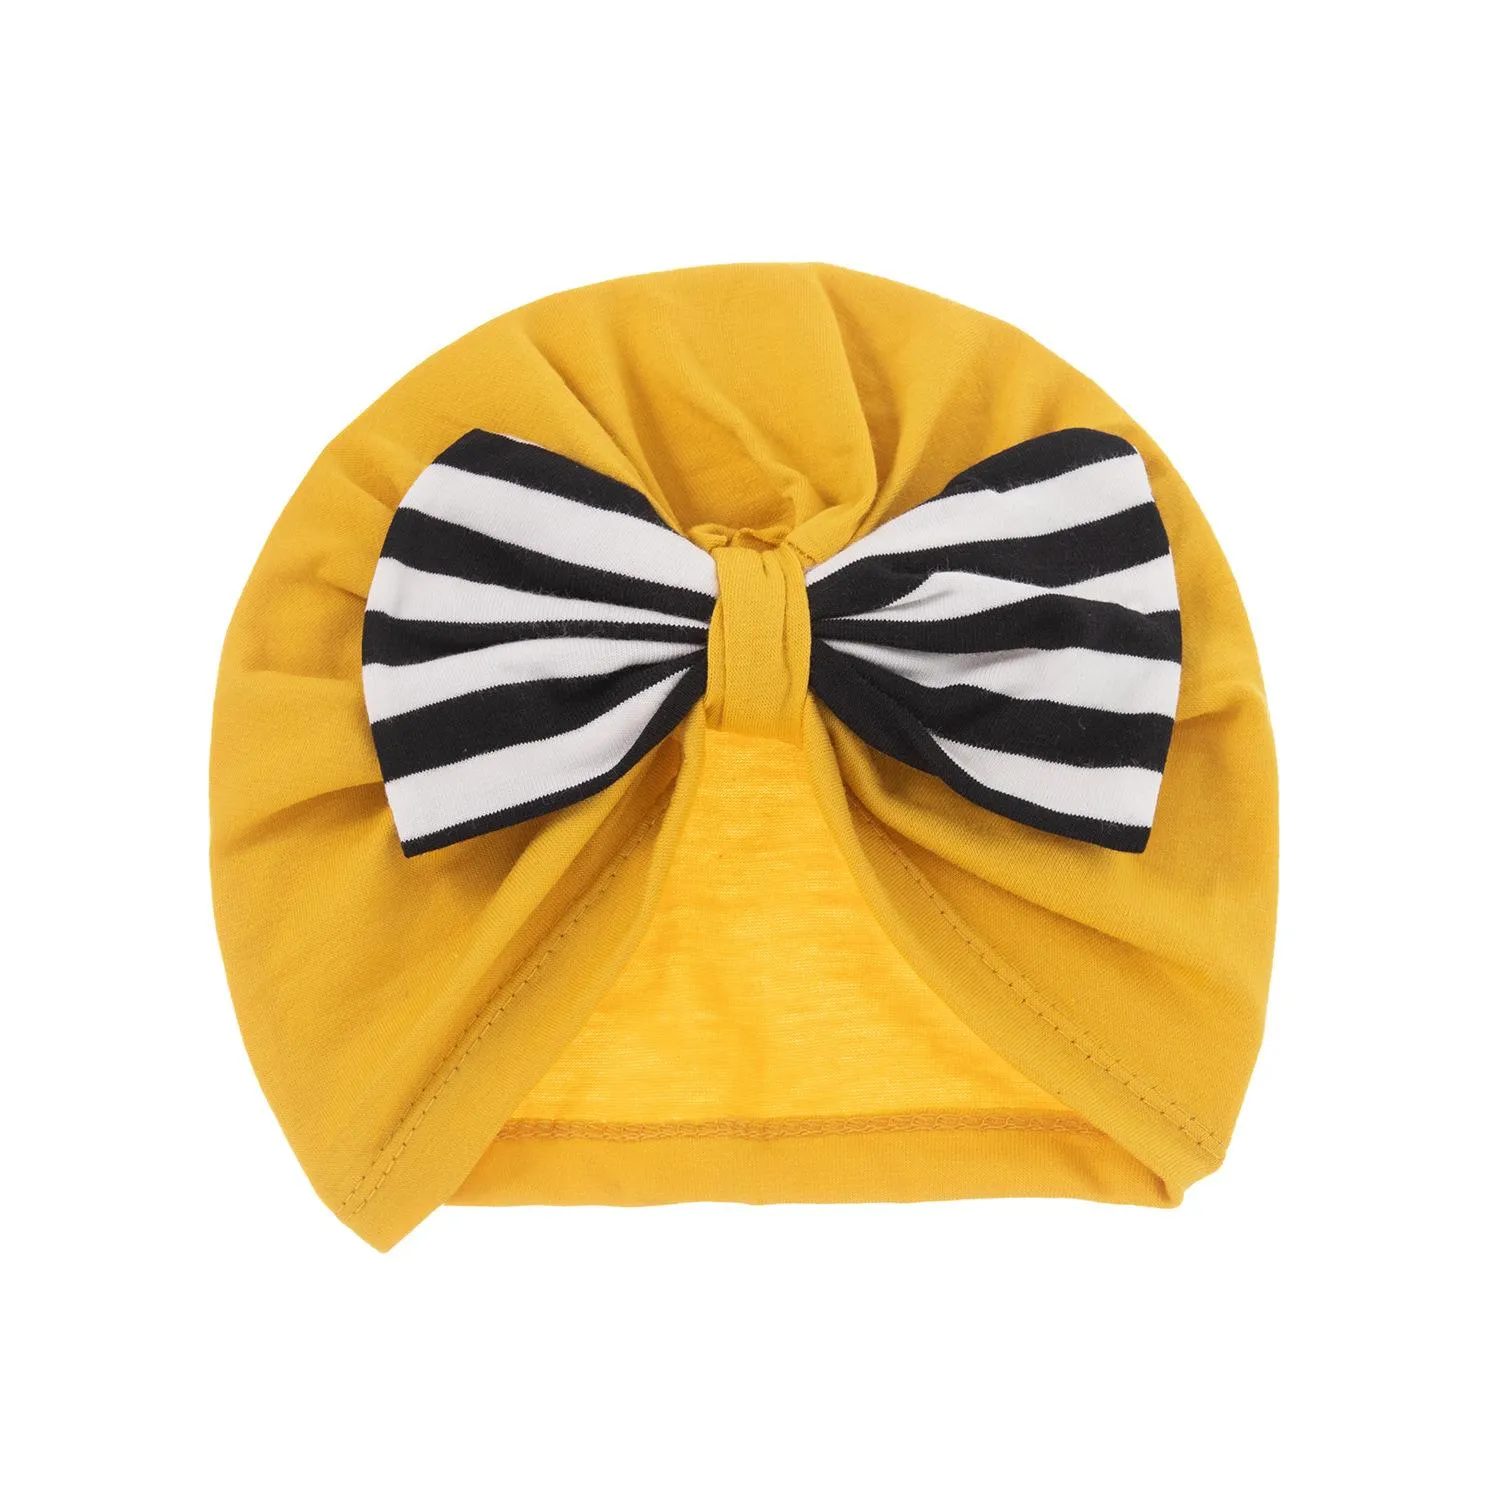 A937 Europe Fashion Infant Baby Cotton Hat Bowknot Headwear Cap Child Toddler Kids Beanies Turban Hats Children Accessories 6 Colors